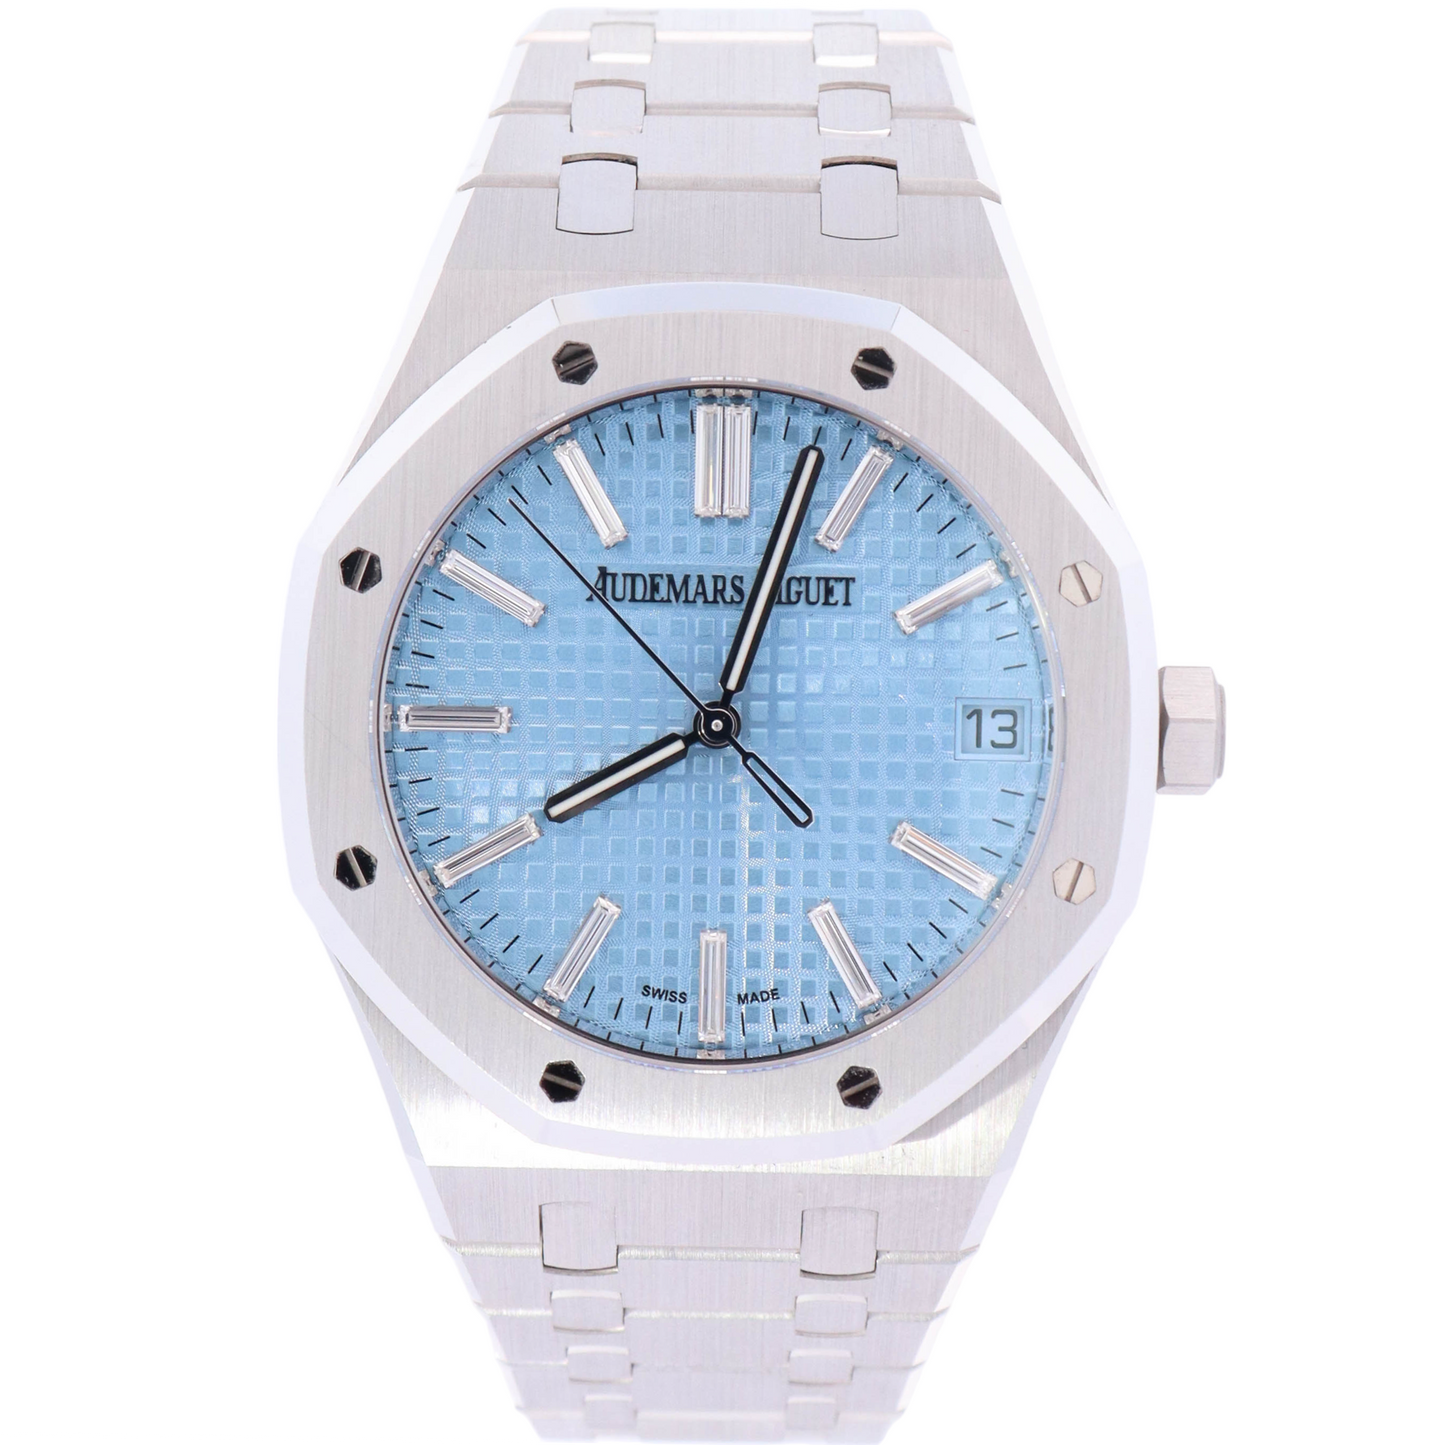 Load image into Gallery viewer, Audemars Piguet Royal Oak 41mm White Gold Light Blue Baguette Dial Watch Reference# 15510BC.OO.1320BC.01 - Happy Jewelers Fine Jewelry Lifetime Warranty
